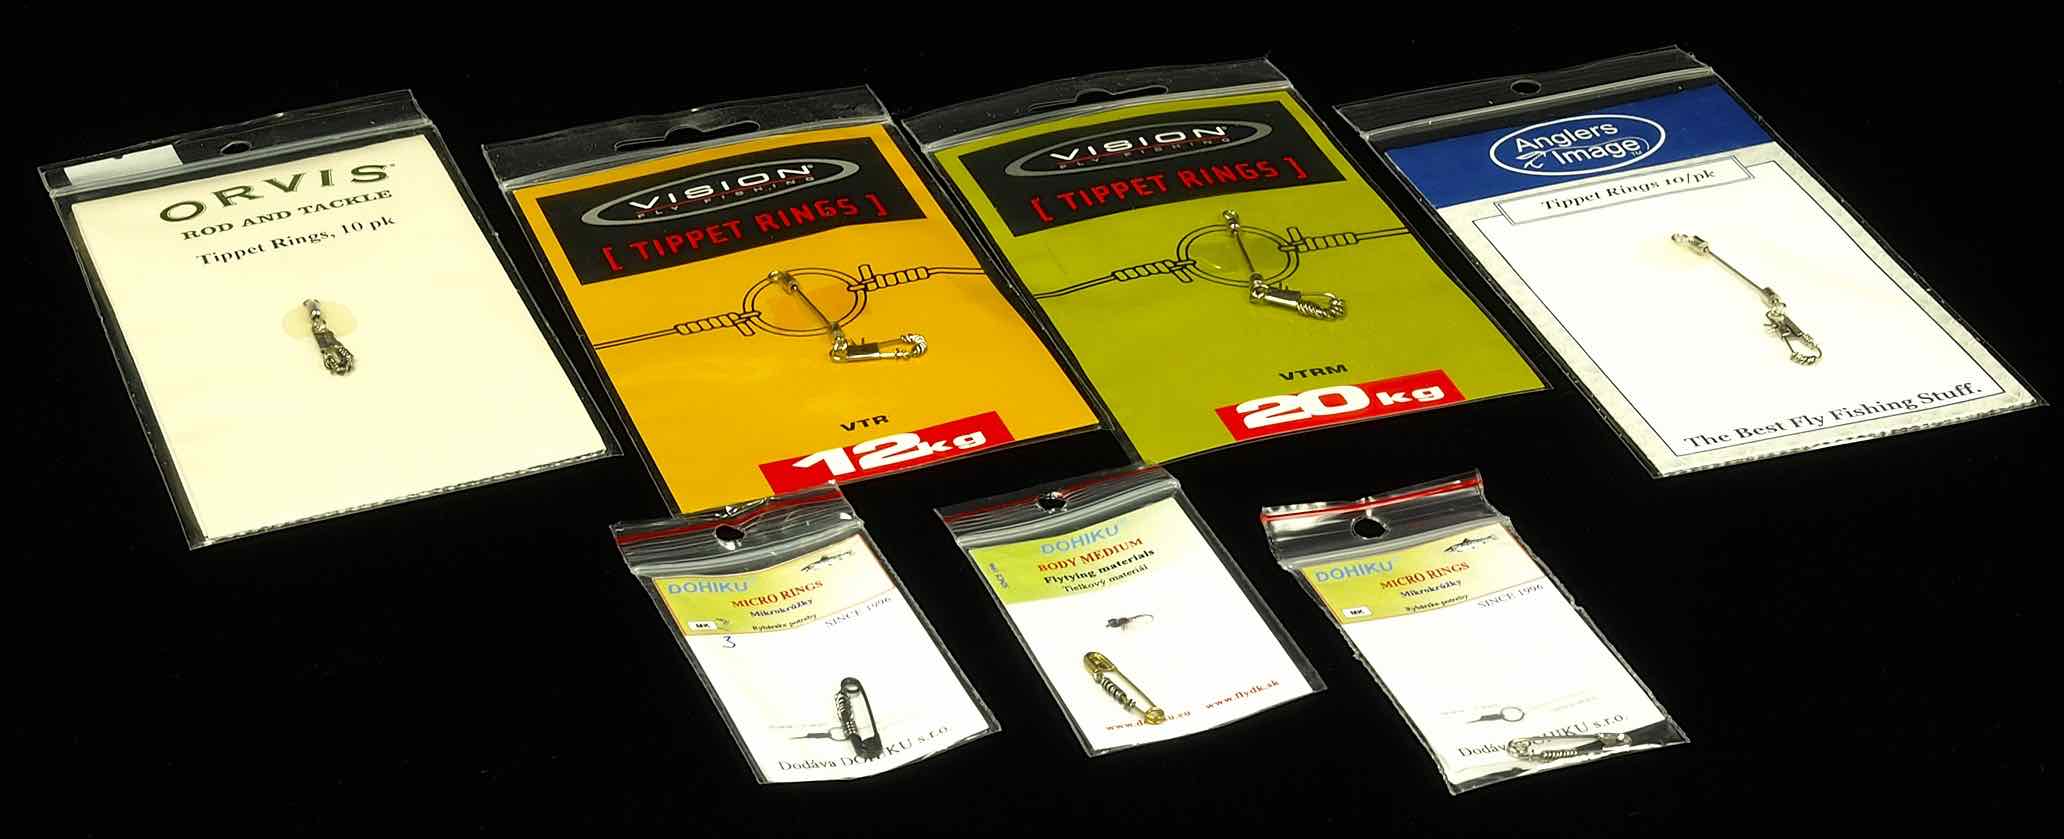 Tippet Rings – The First Cast – Hook, Line and Sinker's Fly